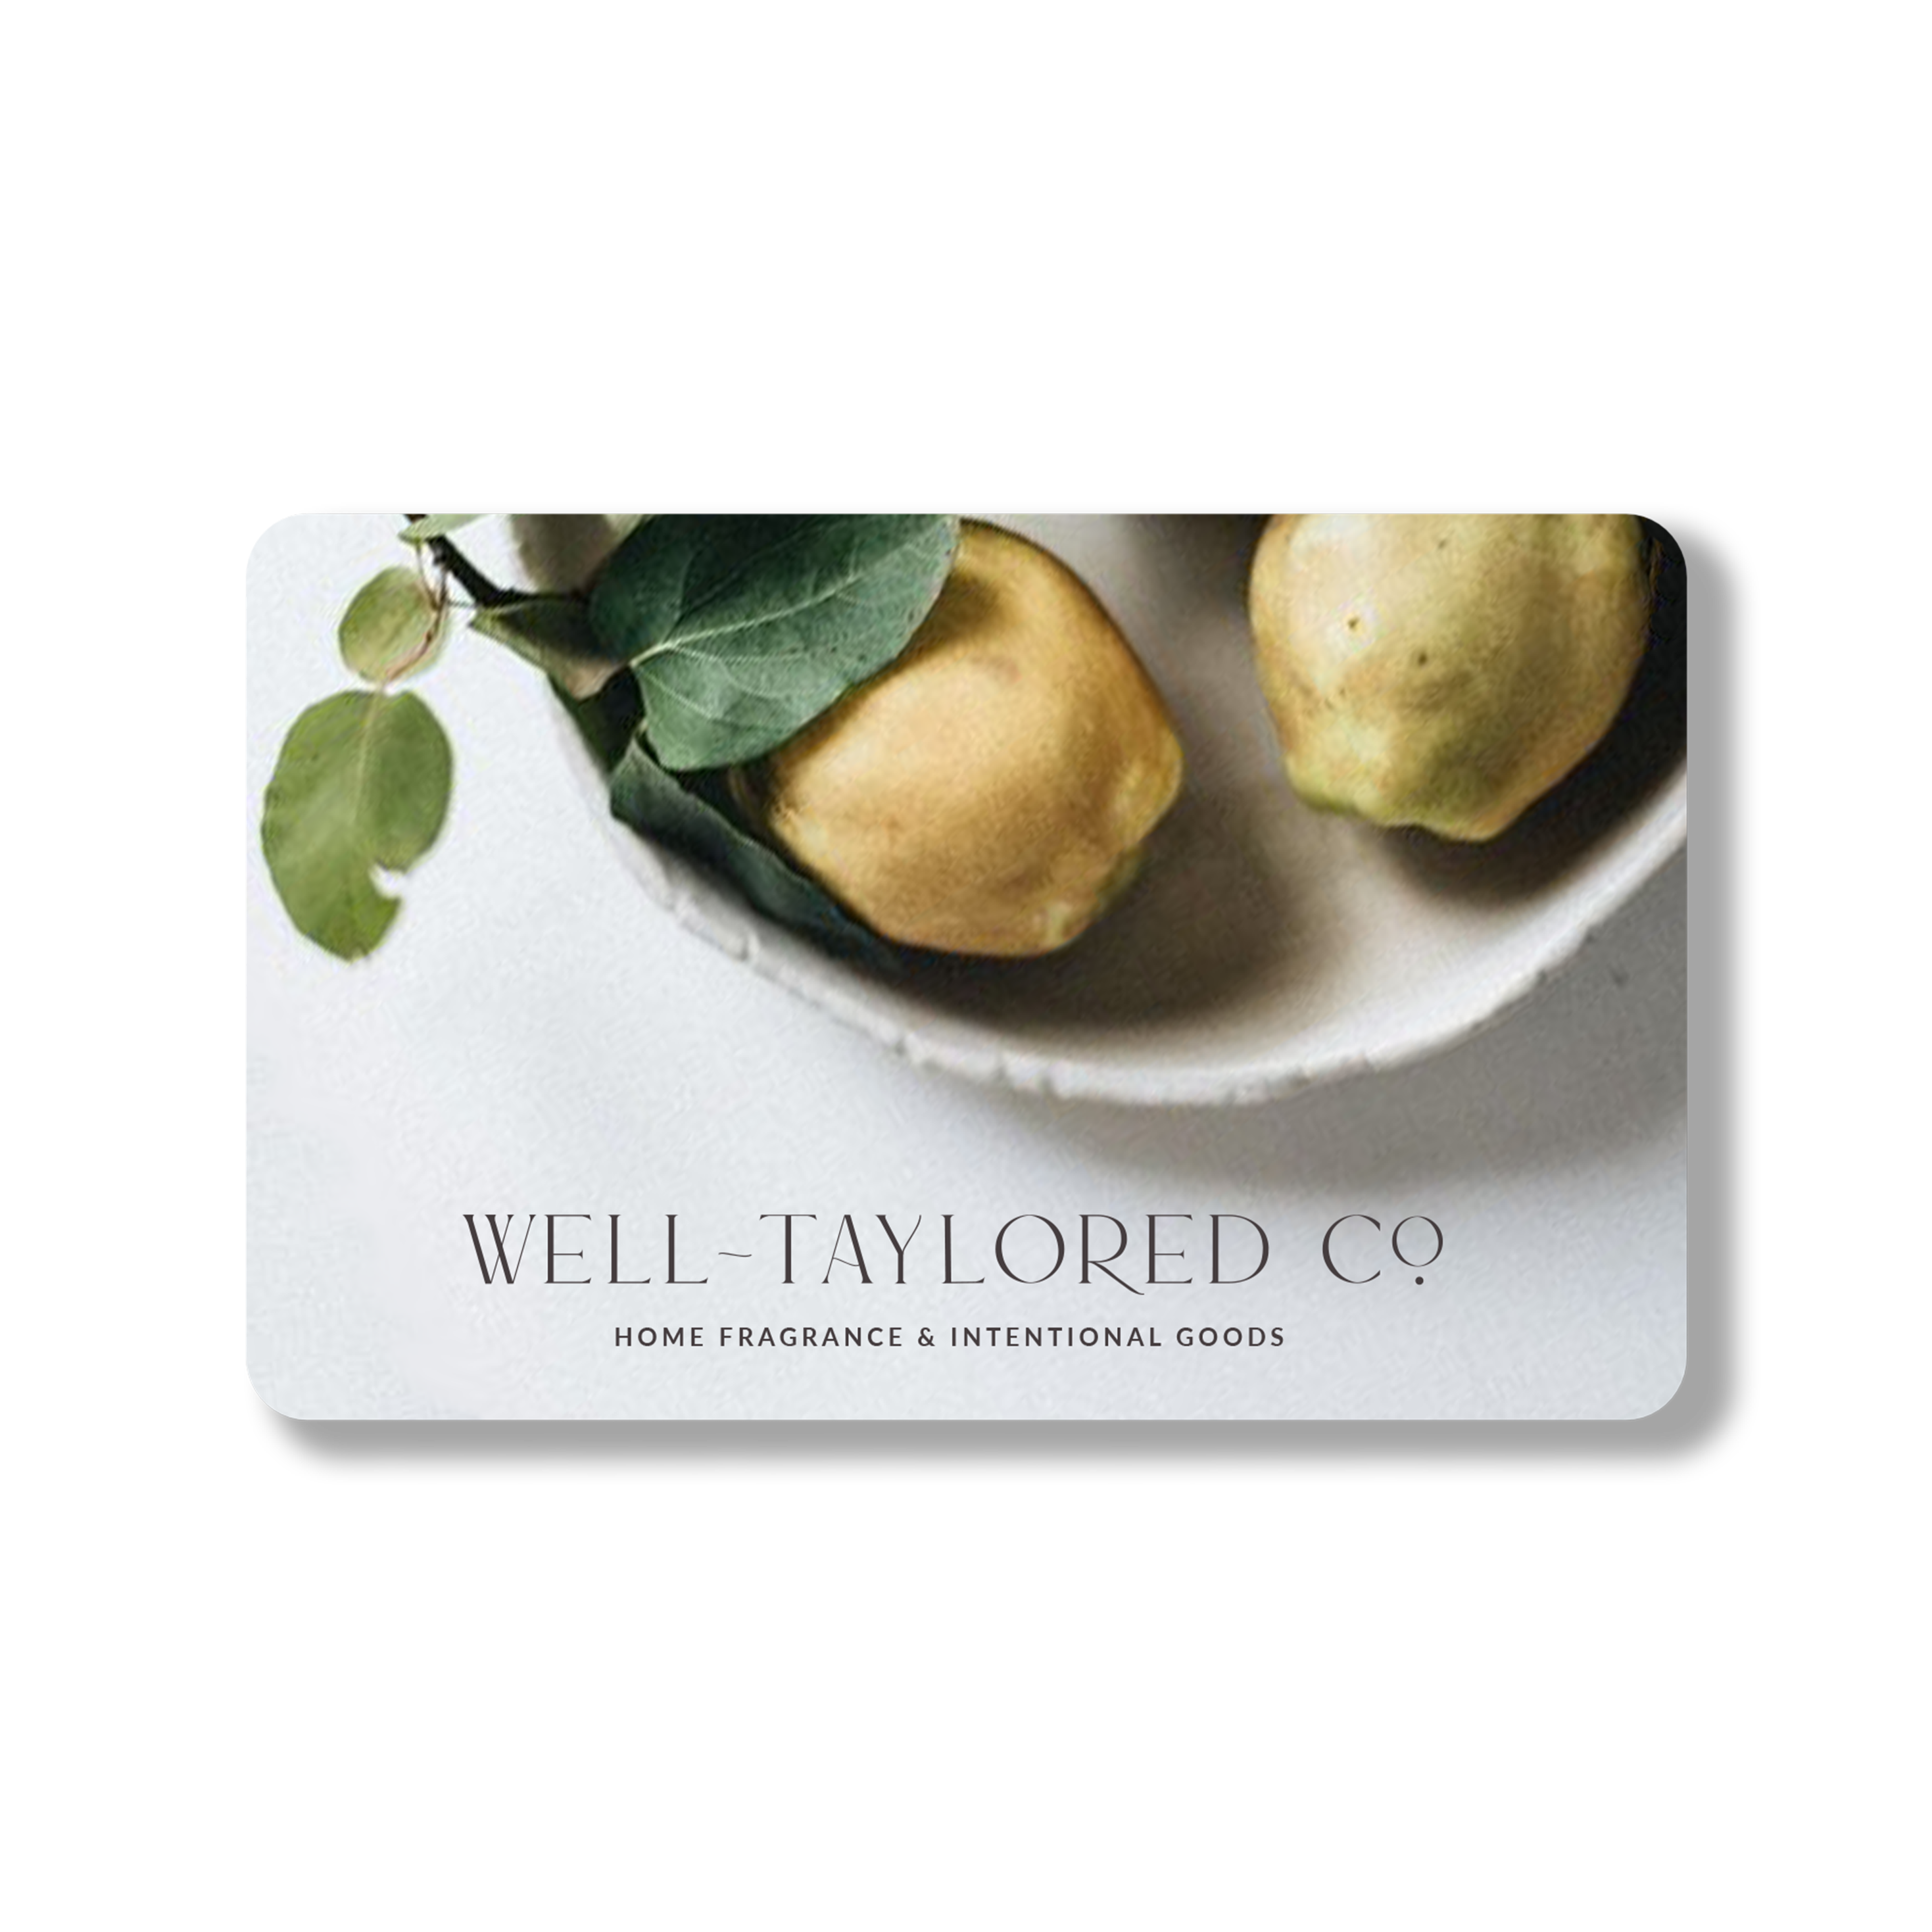 Well-Taylored Co. Gift Card | Well-Taylored Co.